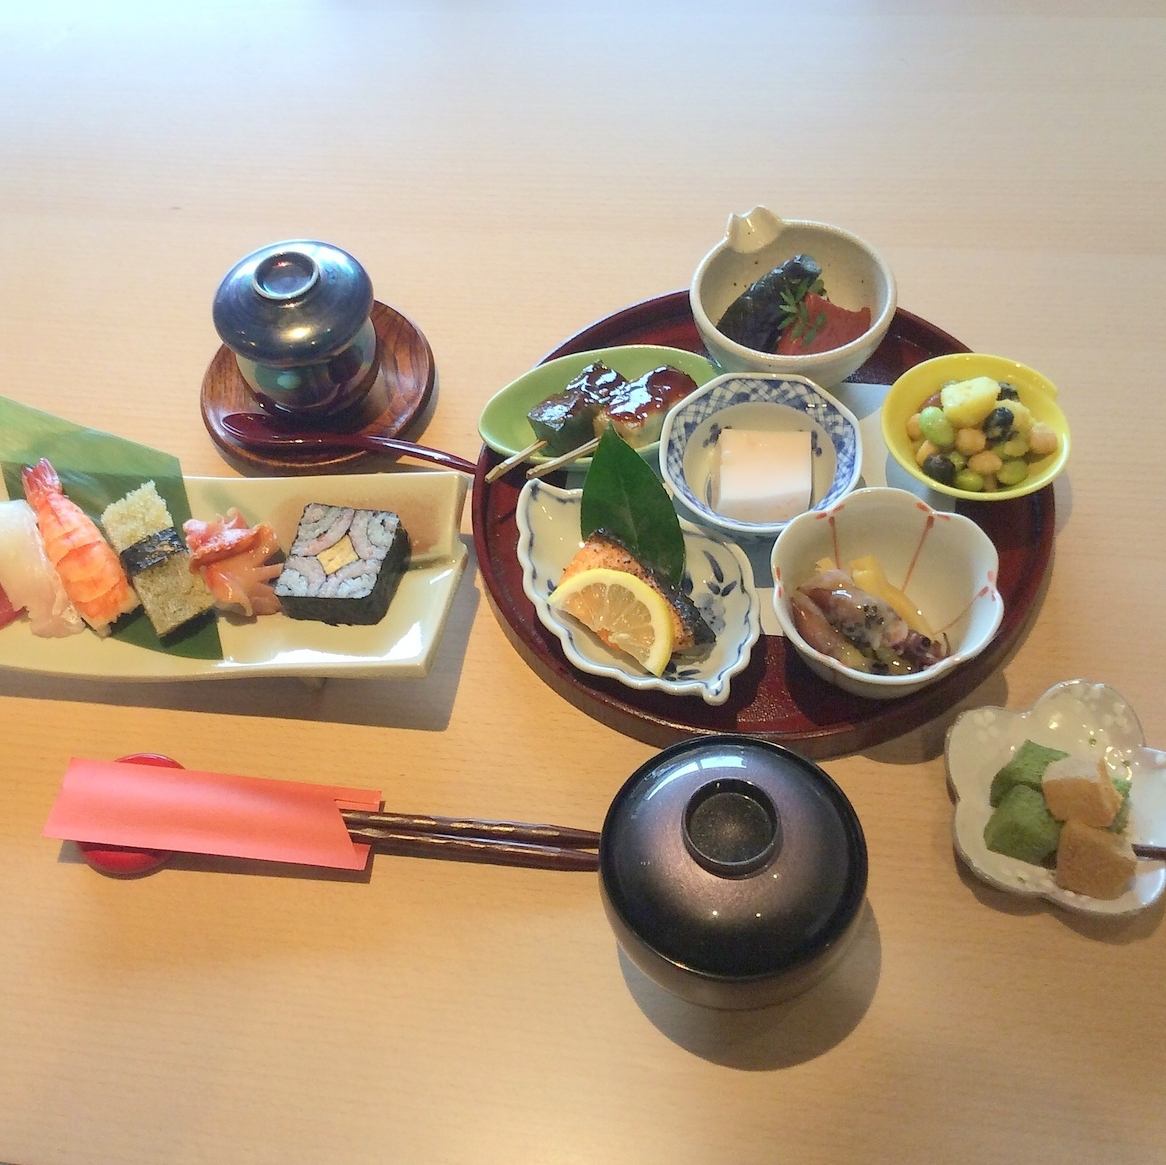 Enjoy the vivid Kyoto-style kaiseki with seasonal ingredients in a calm space like a hideaway for adults.